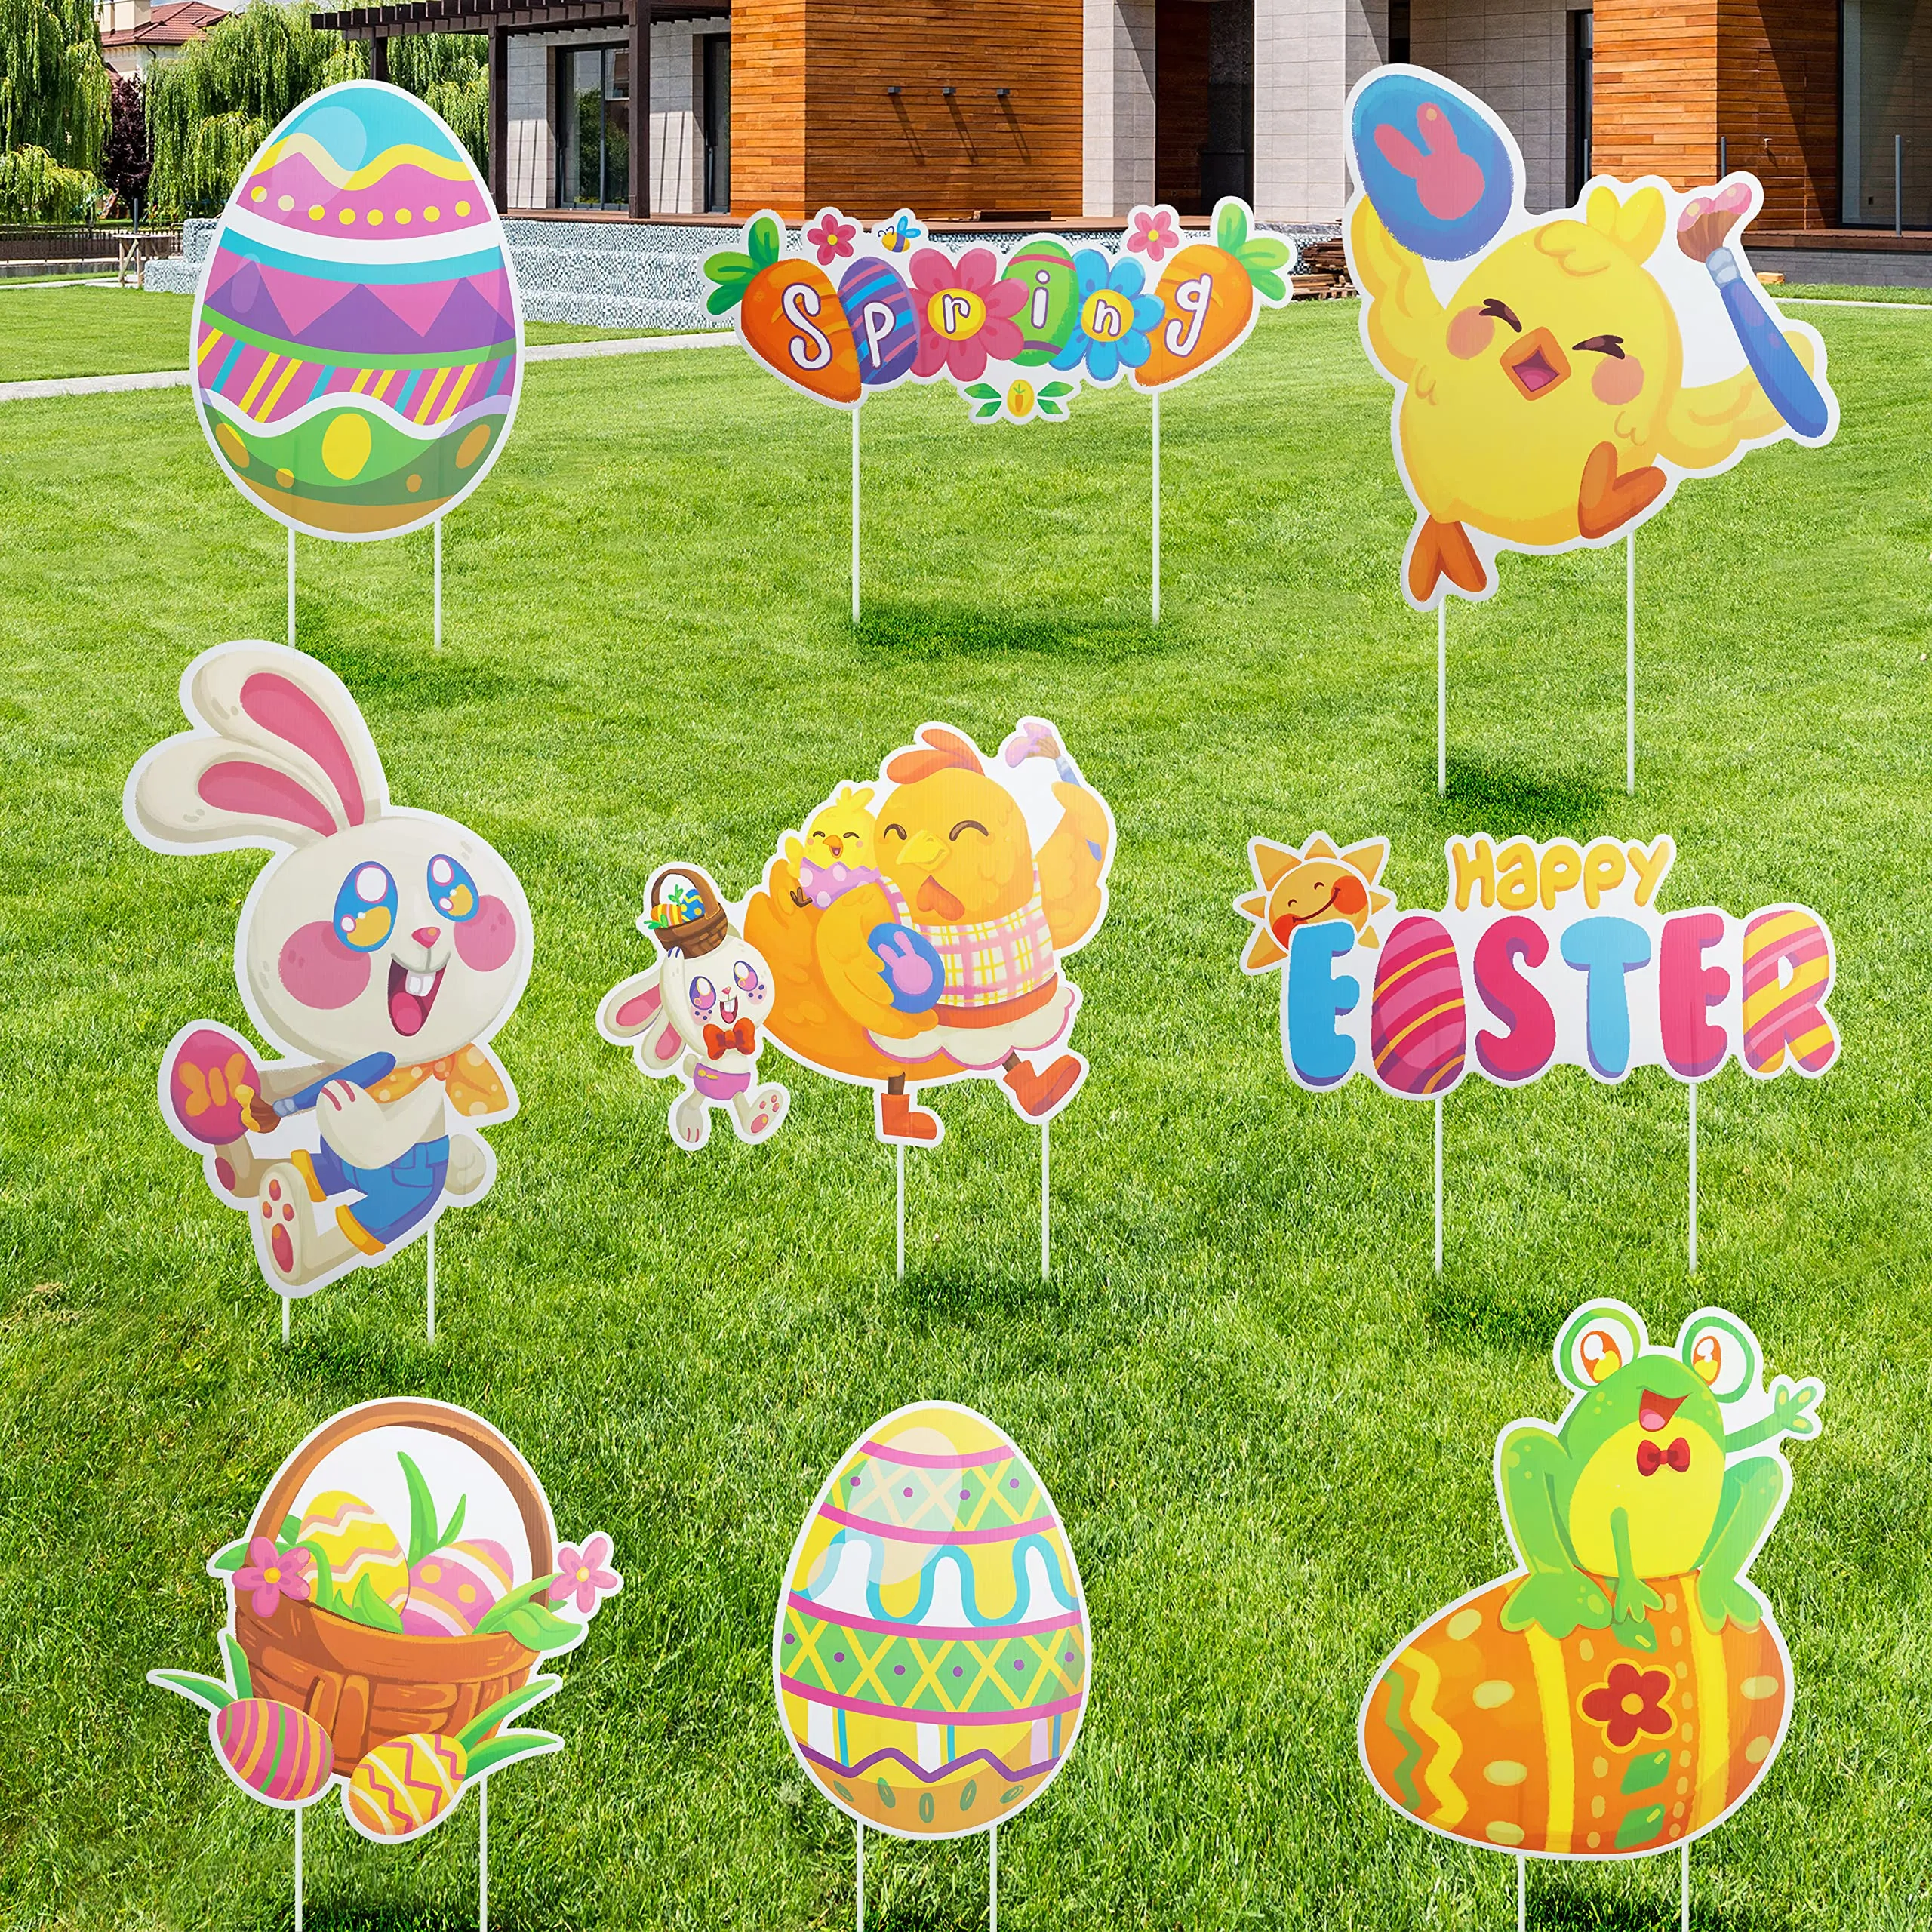 You are currently viewing Are there any traditions associated with specific Easter decorations?